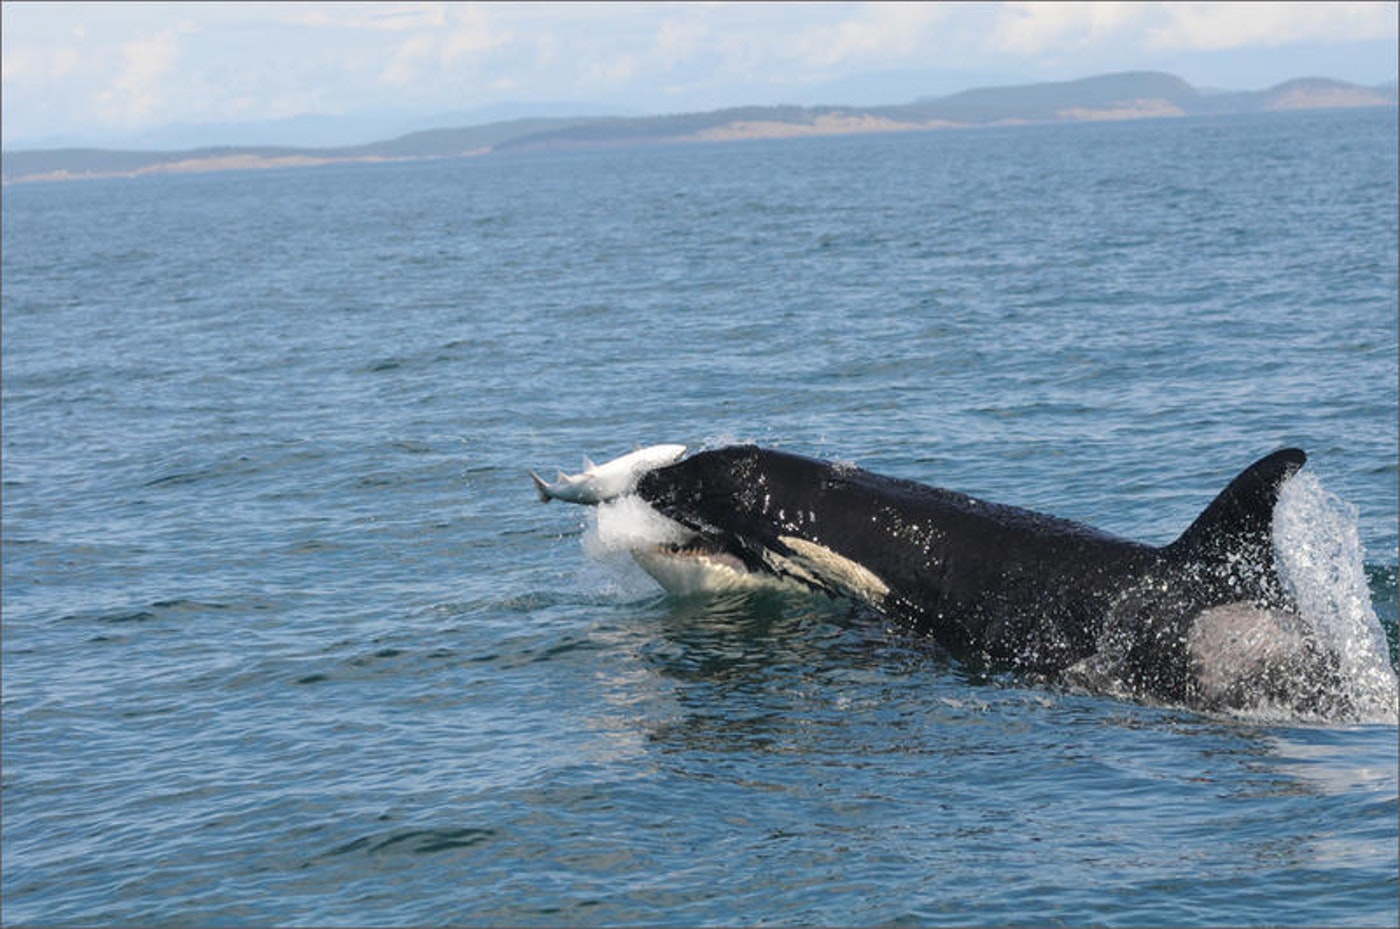 Canadian federal judge Eleanor Dawson said that regulators failed to consider the pipeline's potential impacts of increased shipping on Southern resident killer whales. CREDIT: CANDICE EMMONS / NOAA FISHERIES/NORTHWEST FISHERIES SCIENCE CENTER